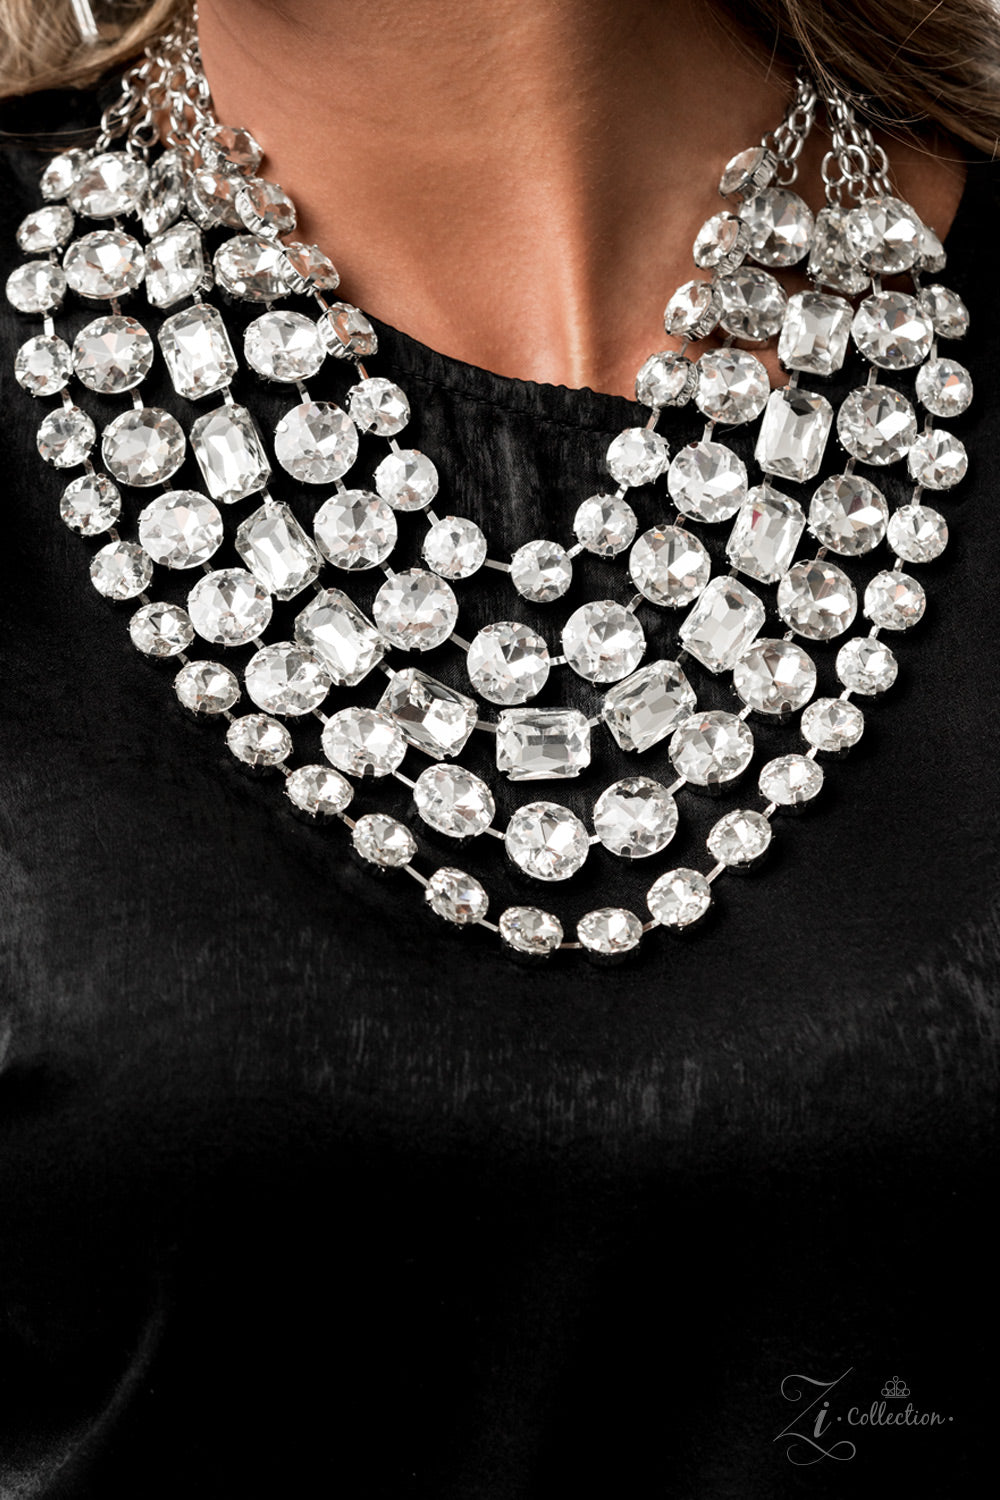 Irresistible - Paparazzi Zi Collection necklace